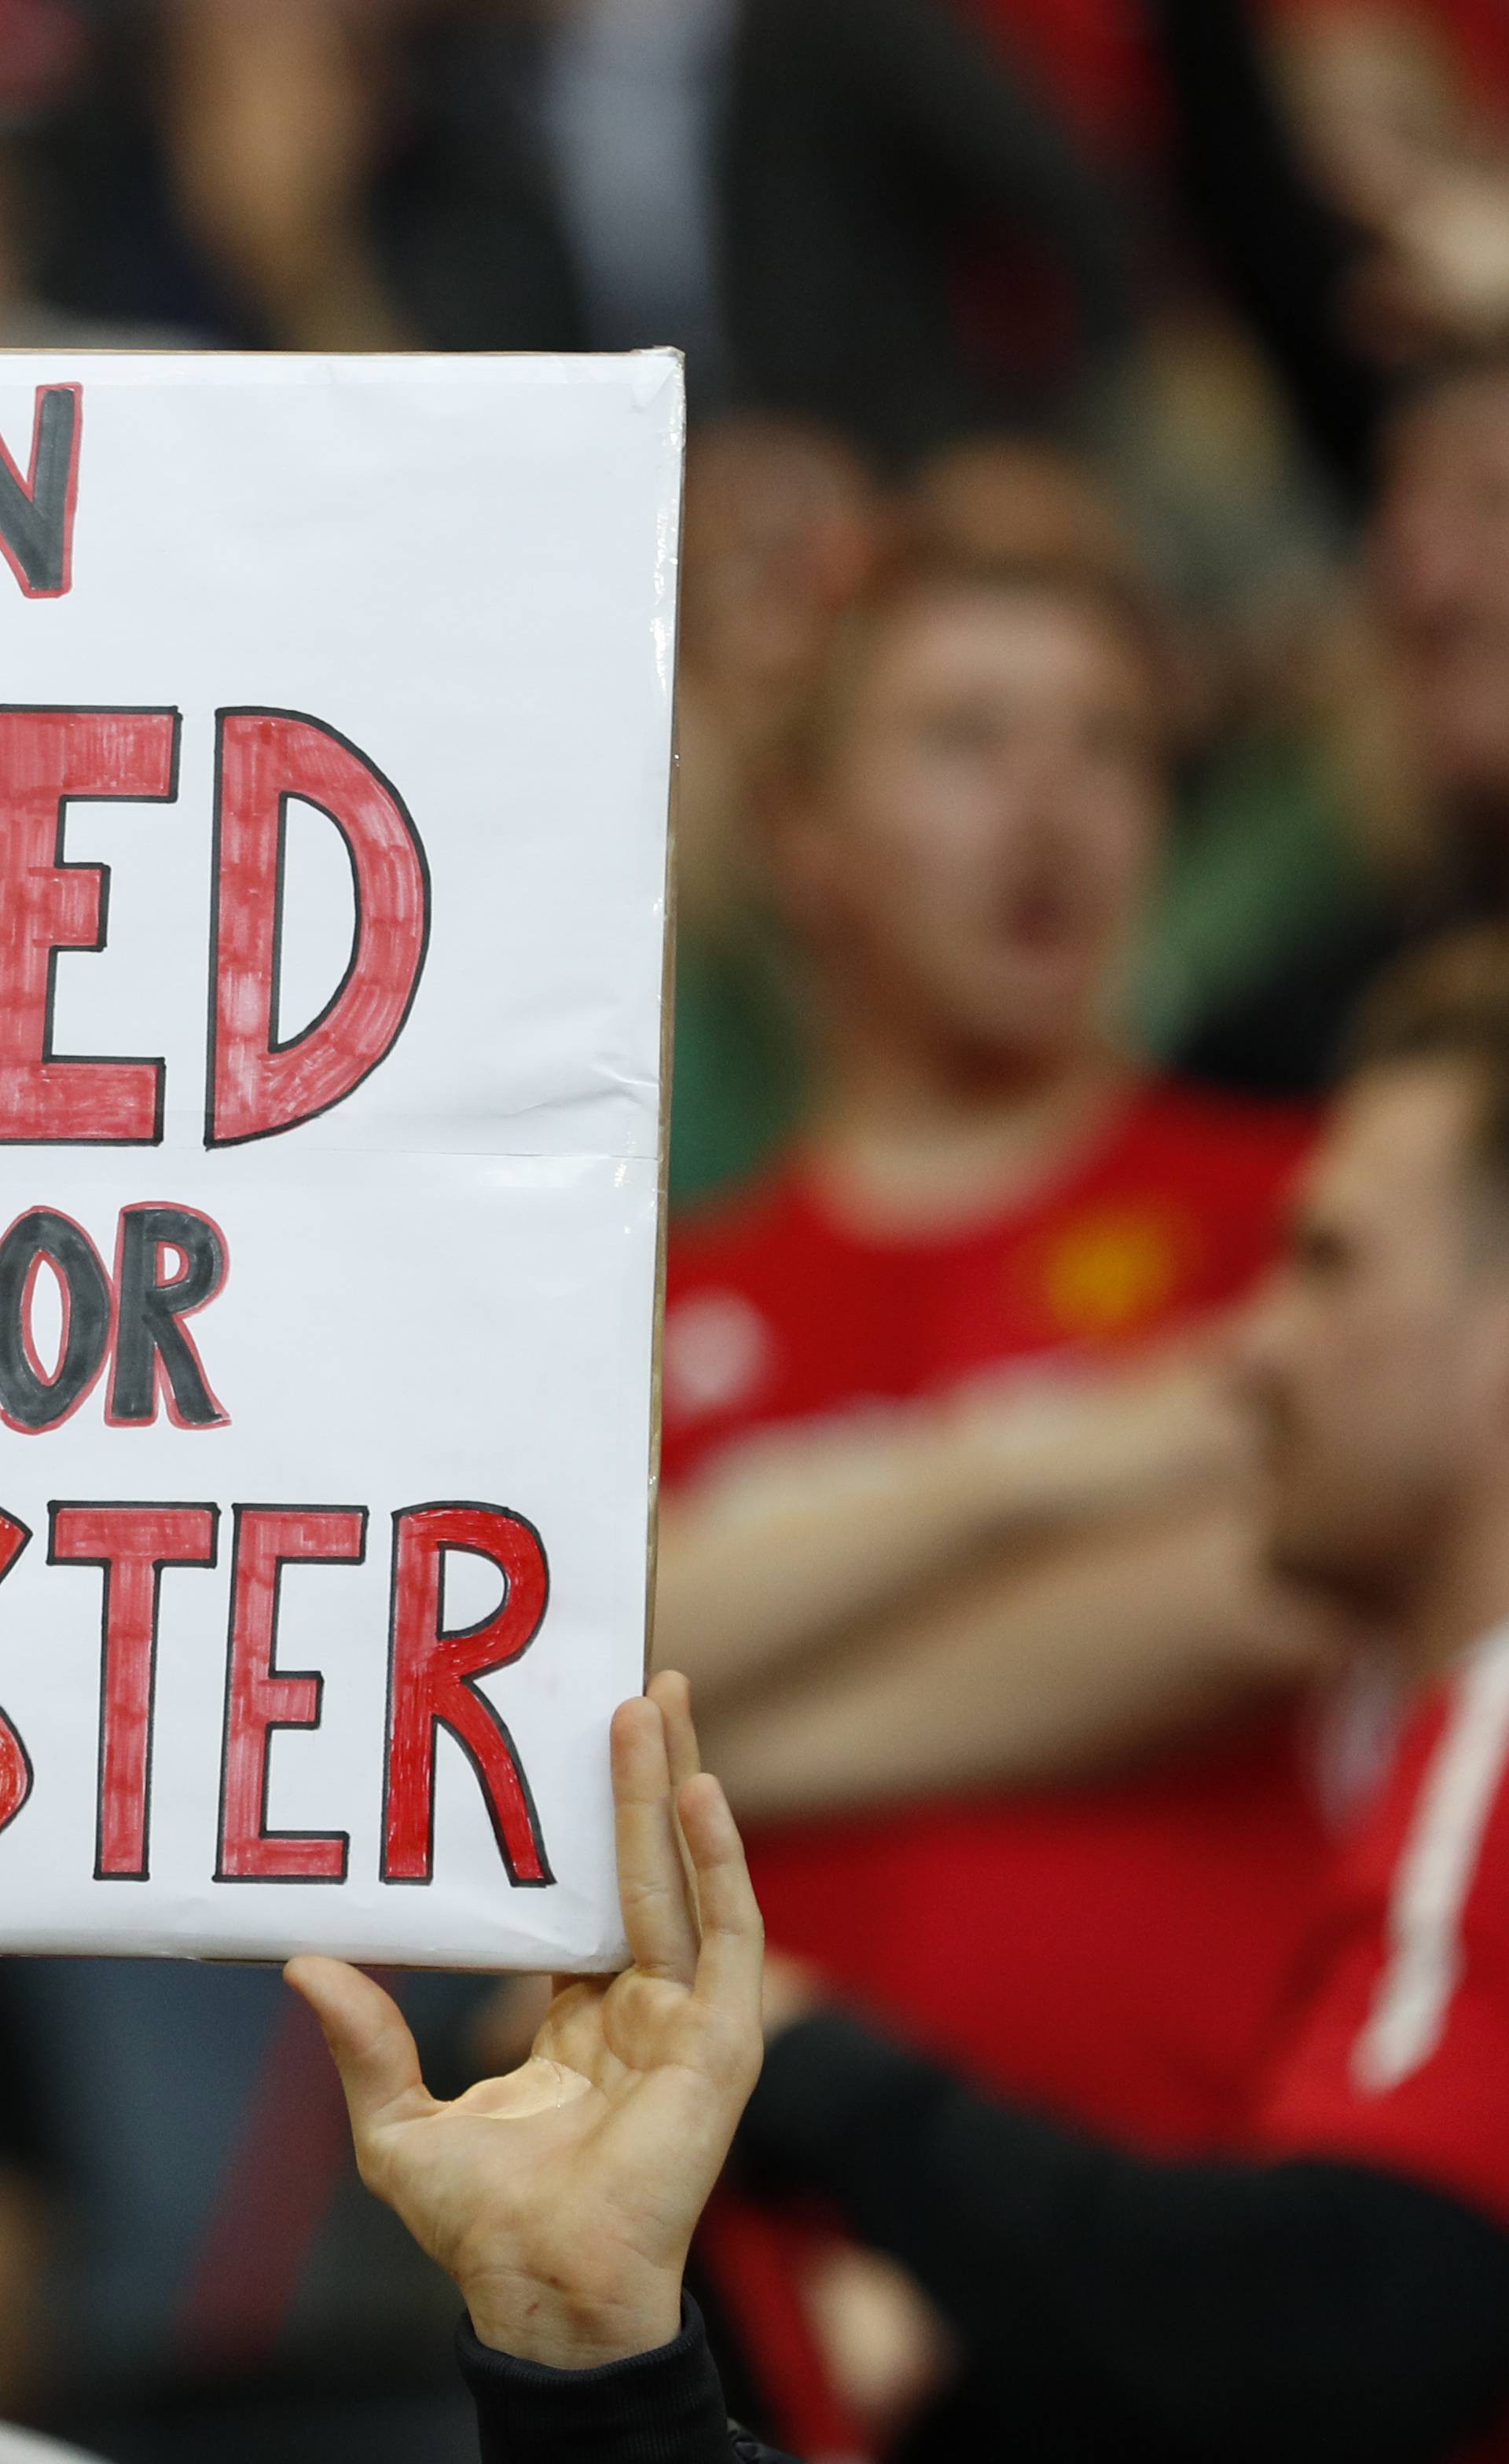 Manchester United fan with a banner in tribute to the victims of the Manchester attack